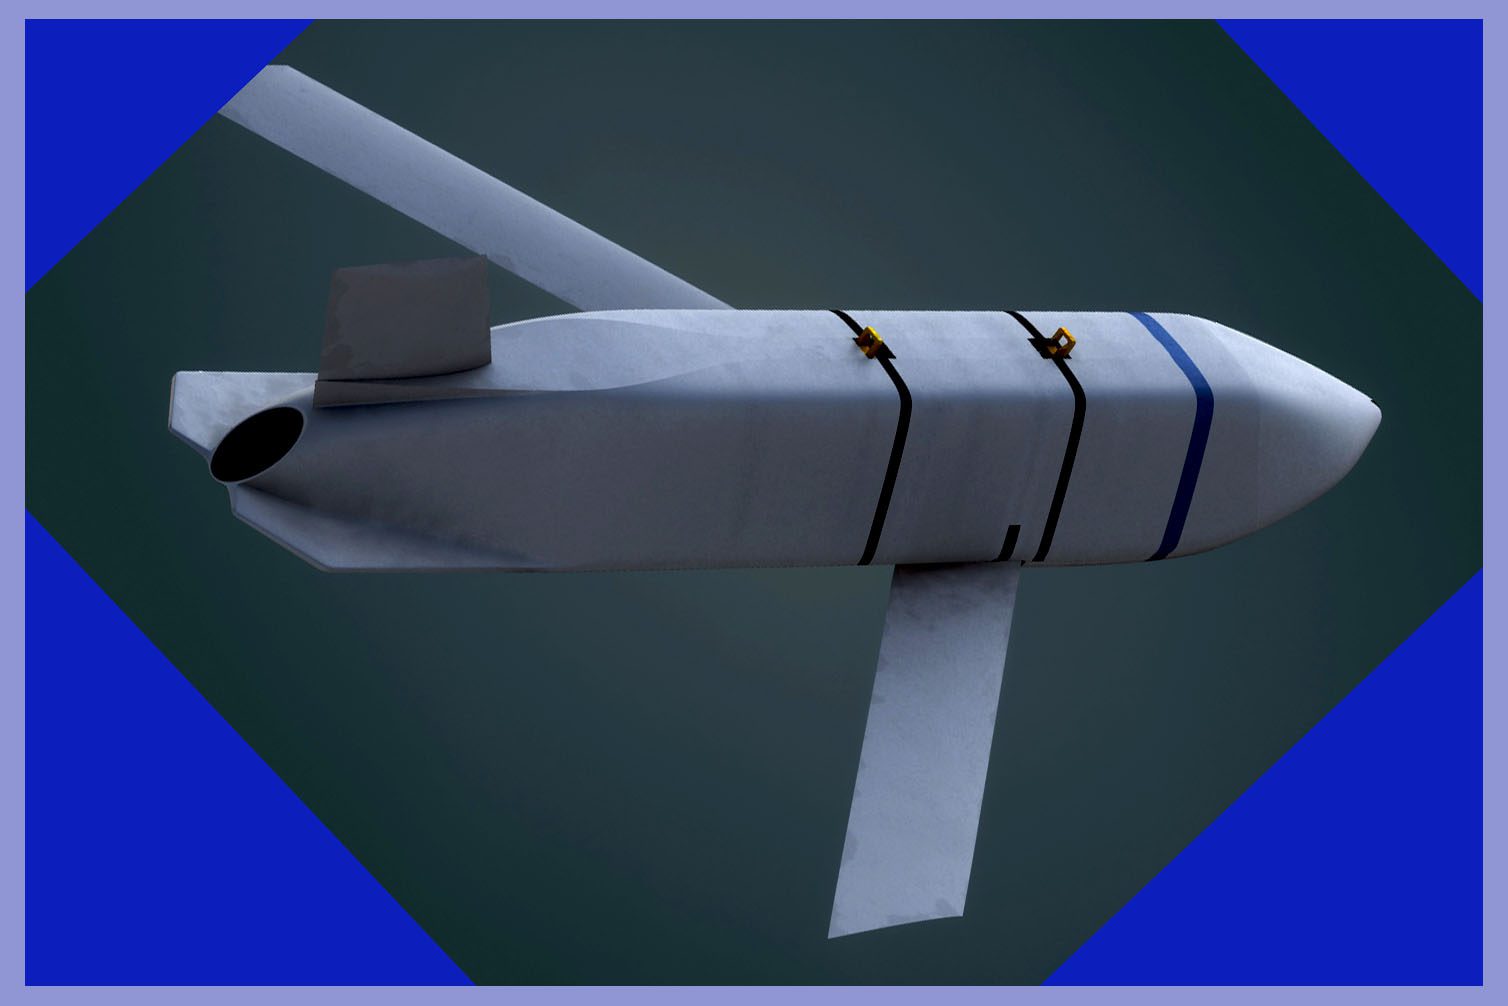 Photo Credit: Turbosquid / What is AGM-158 JASSM? Delving into its Exact Details